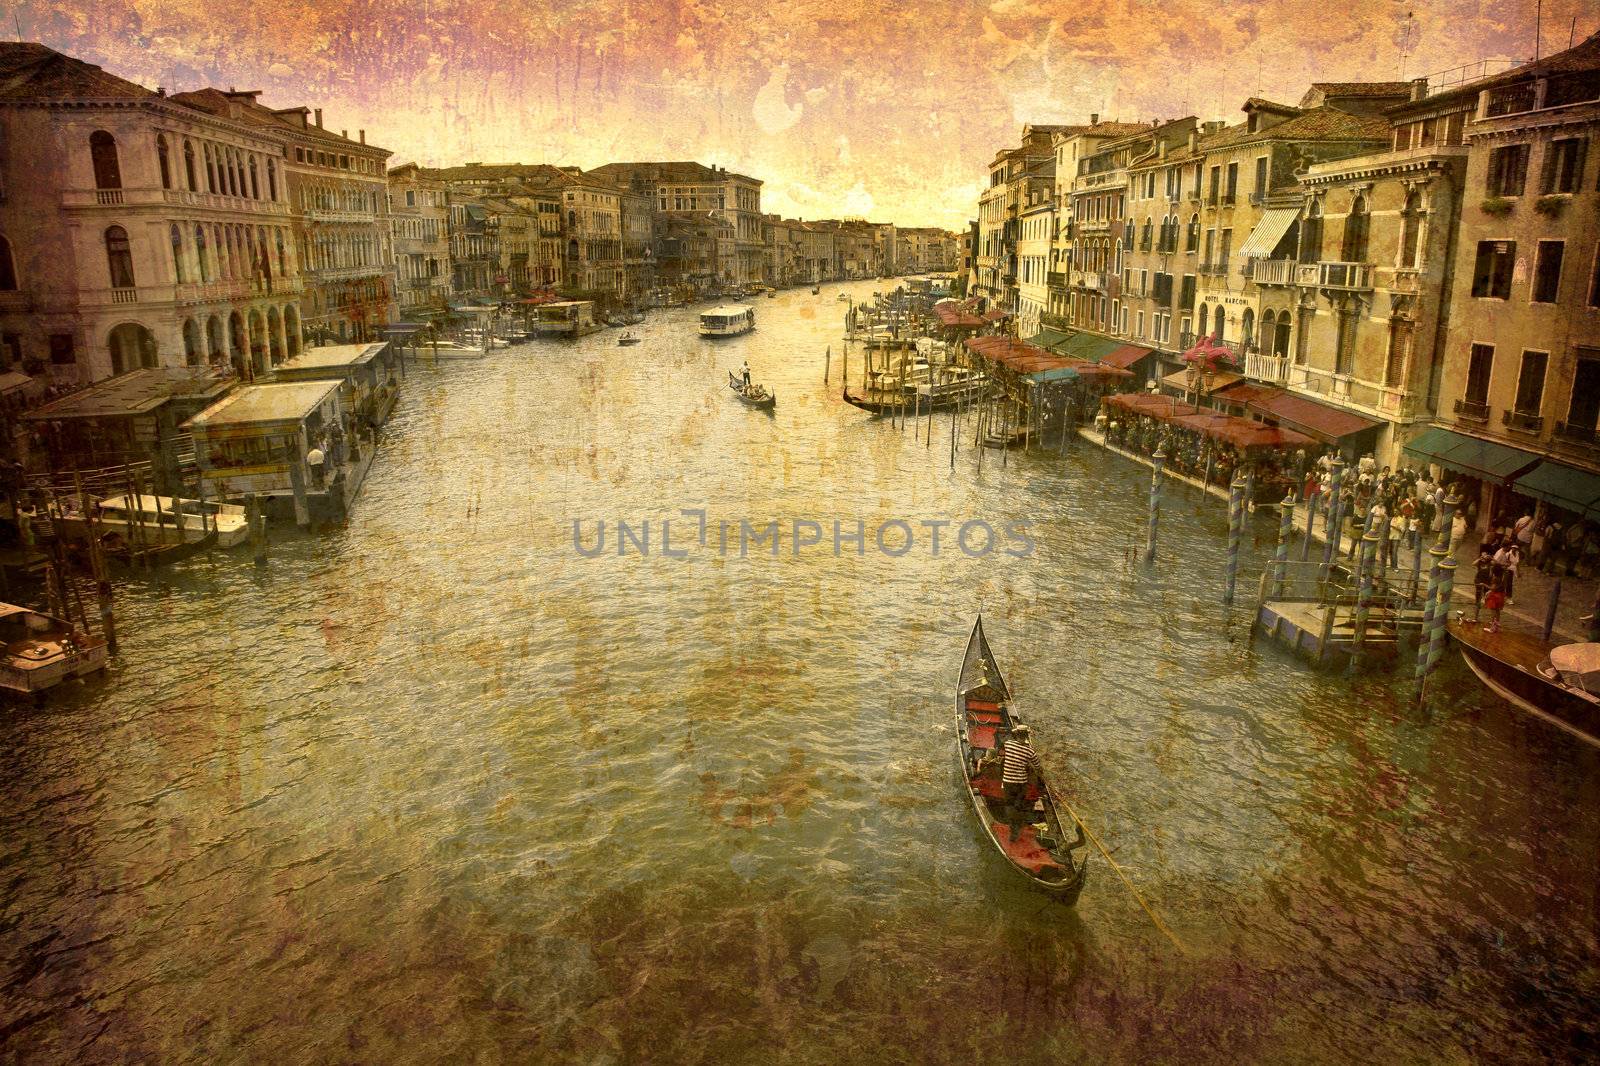 Artistic work of my own in retro style - Postcard from Italy. - Grand Canal seen from Rialto Bridge - Venice.